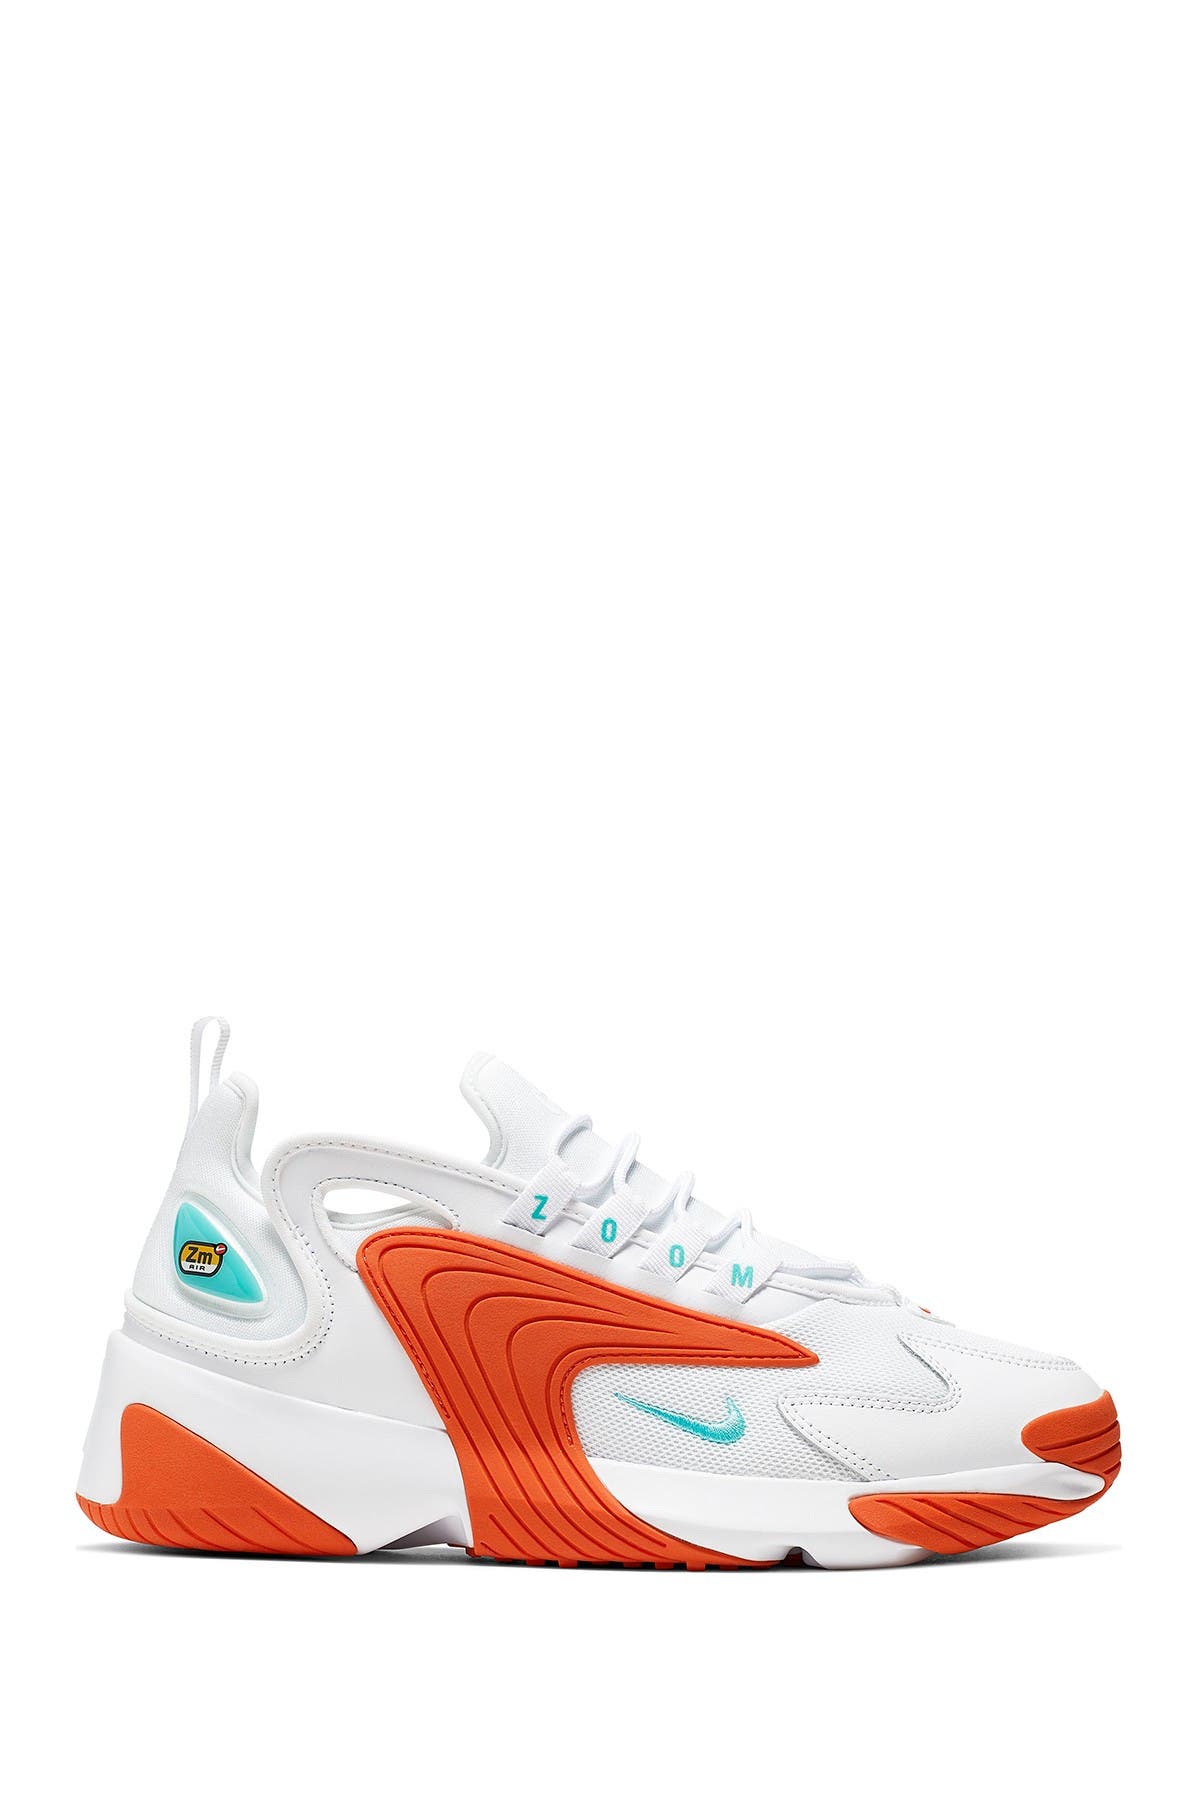 nike zoom 2k urban outfitters